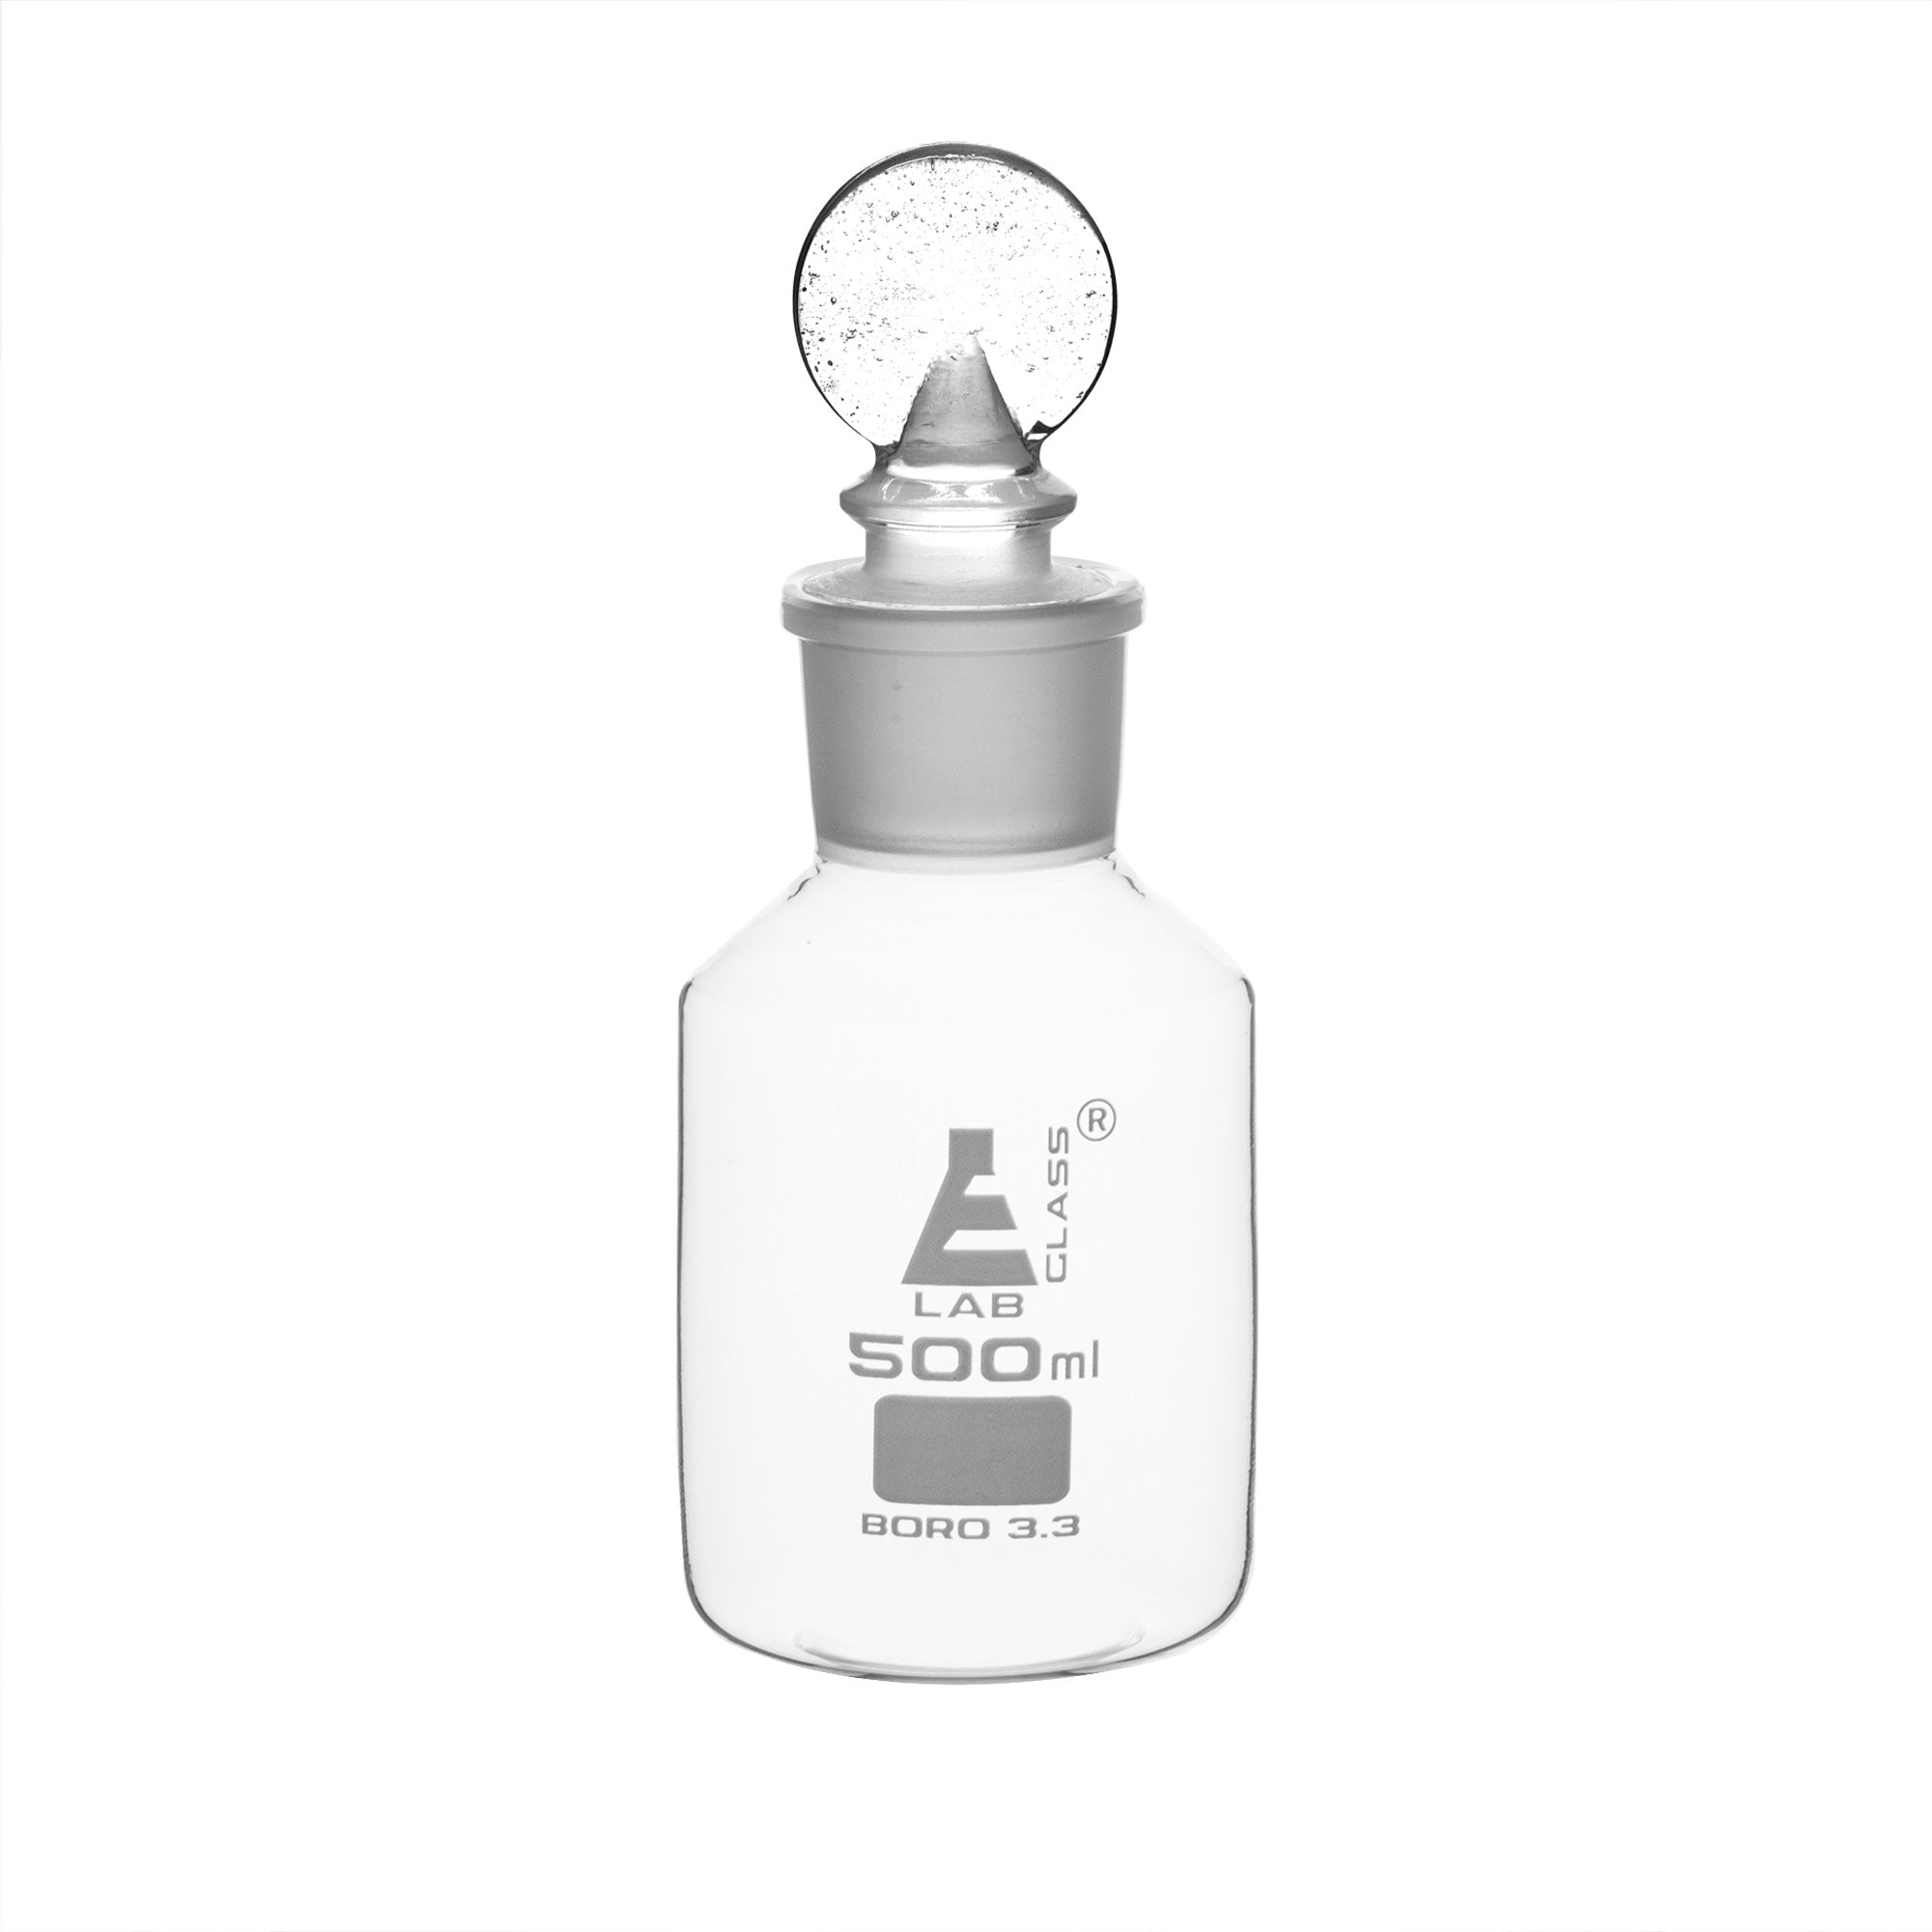 Clear Borosilicate Glass Reagent Bottle with Hollow Glass Stopper, 500 ml, Wide Mouth, Autoclavable